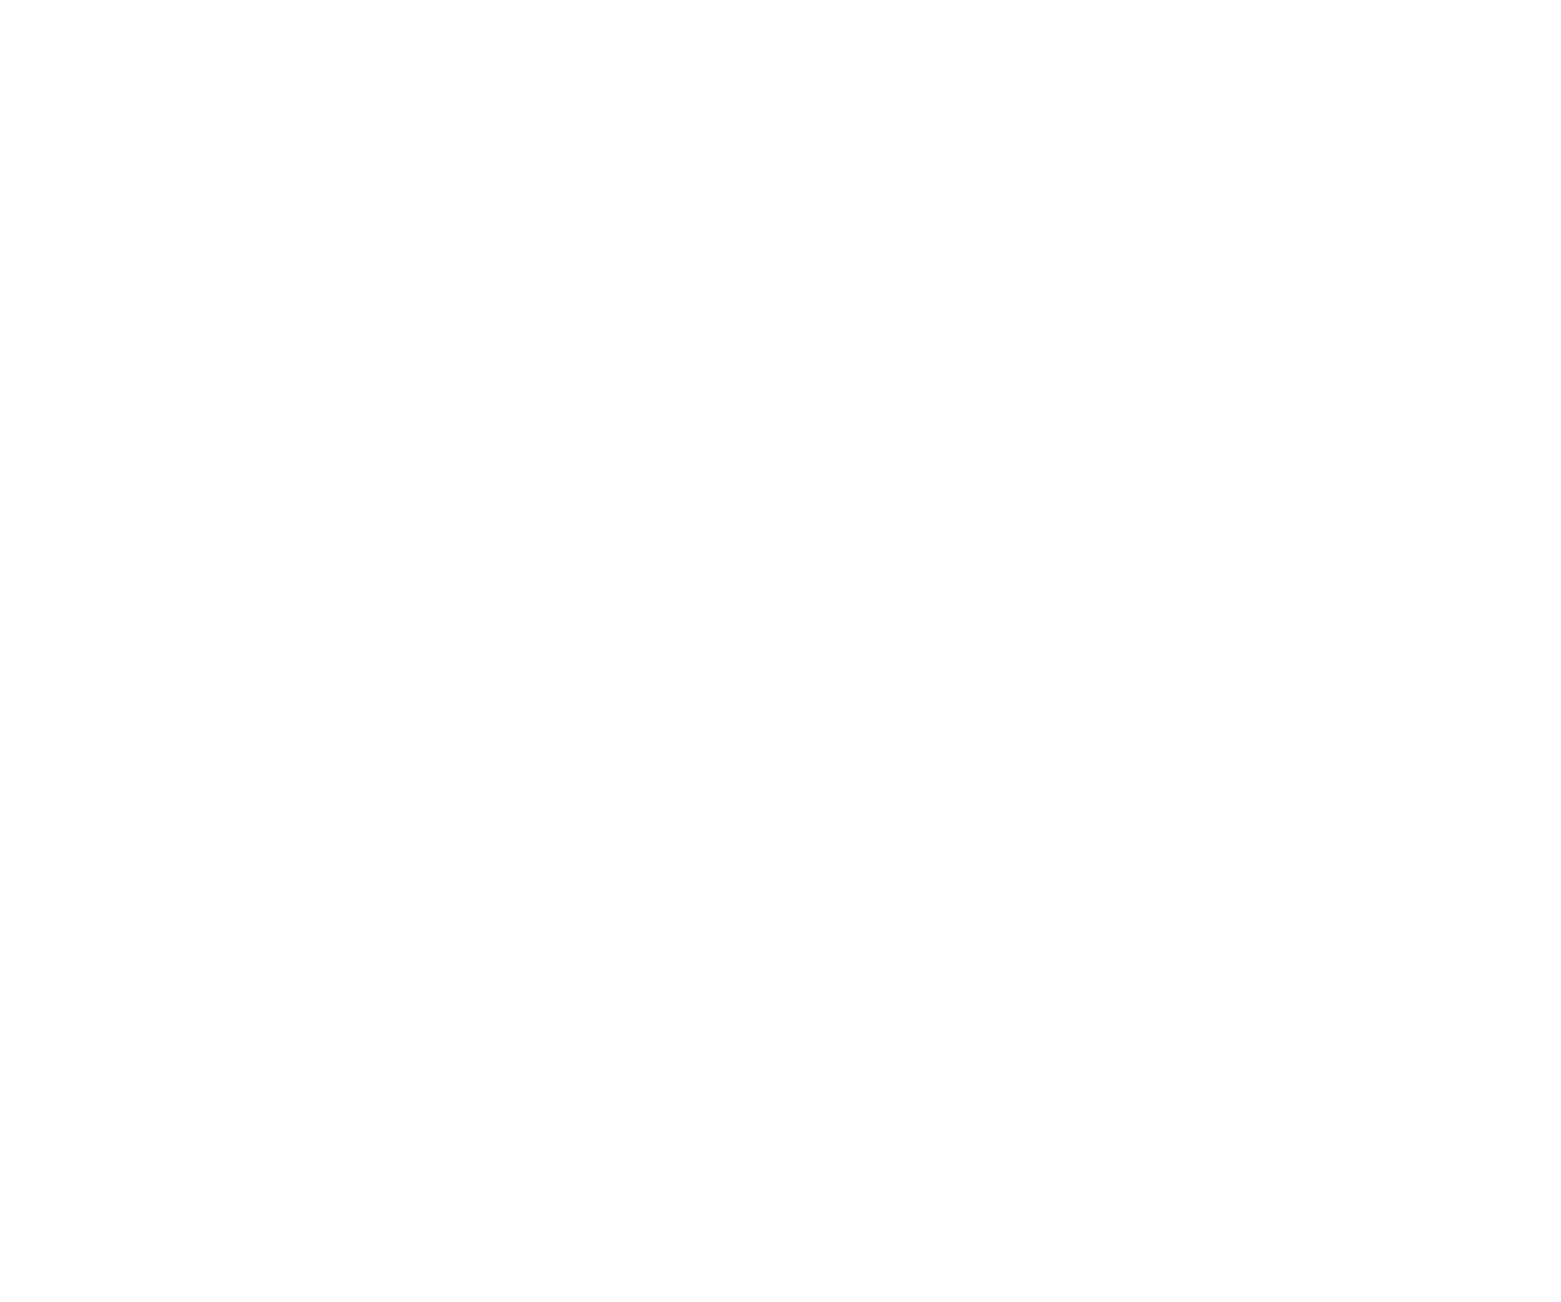 The Glimpse Group logo large for dark backgrounds (transparent PNG)